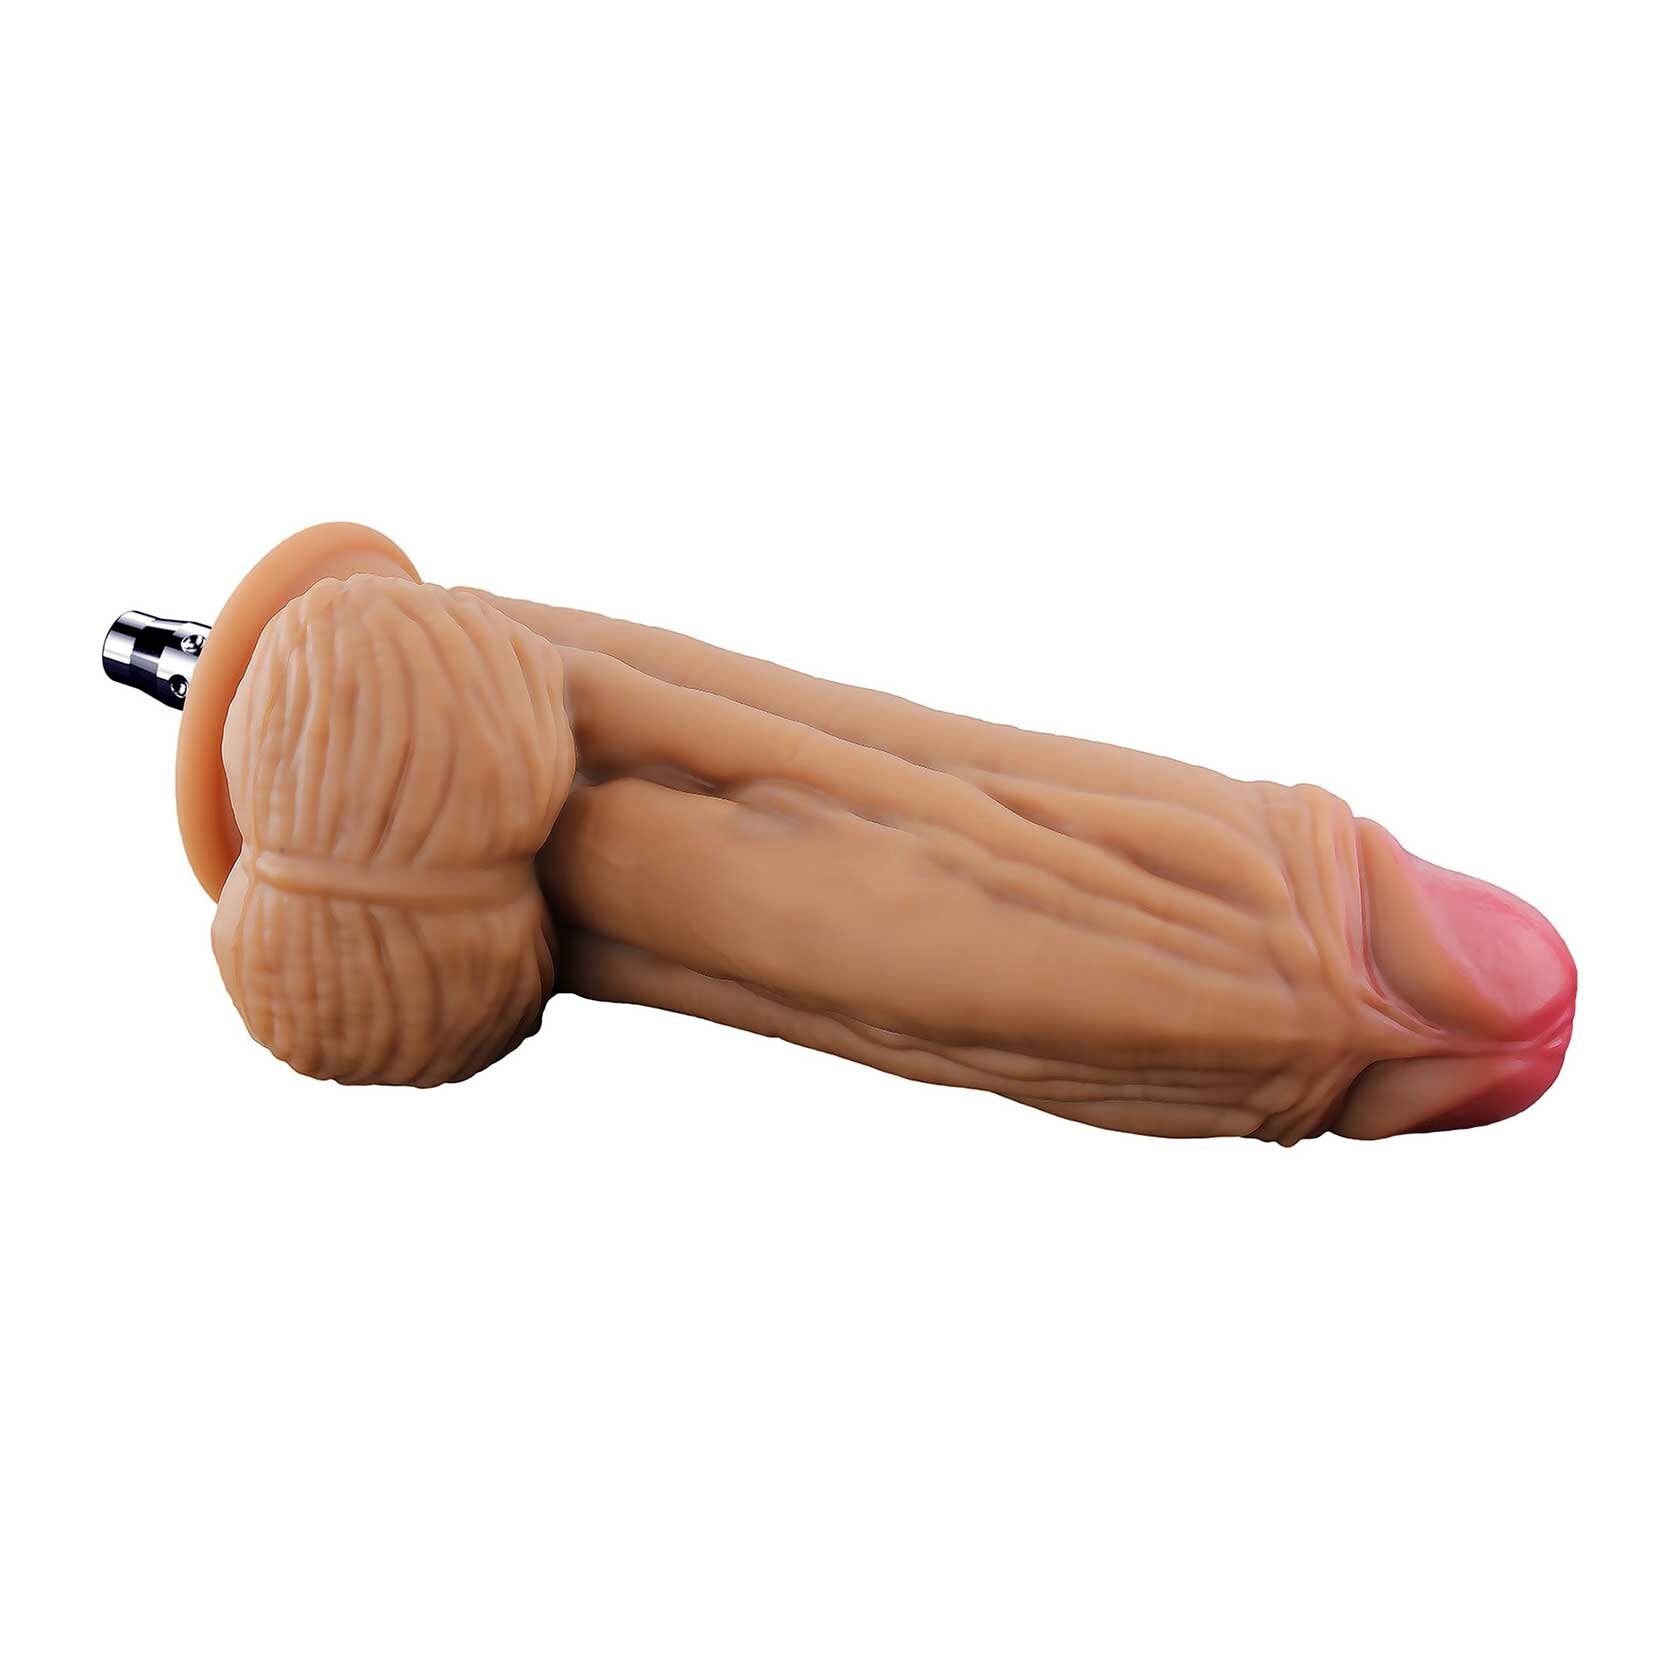 8.9inch Gigantic Thick Fat Cock Silicone Dildo with Balls for Jessky Sex Machines